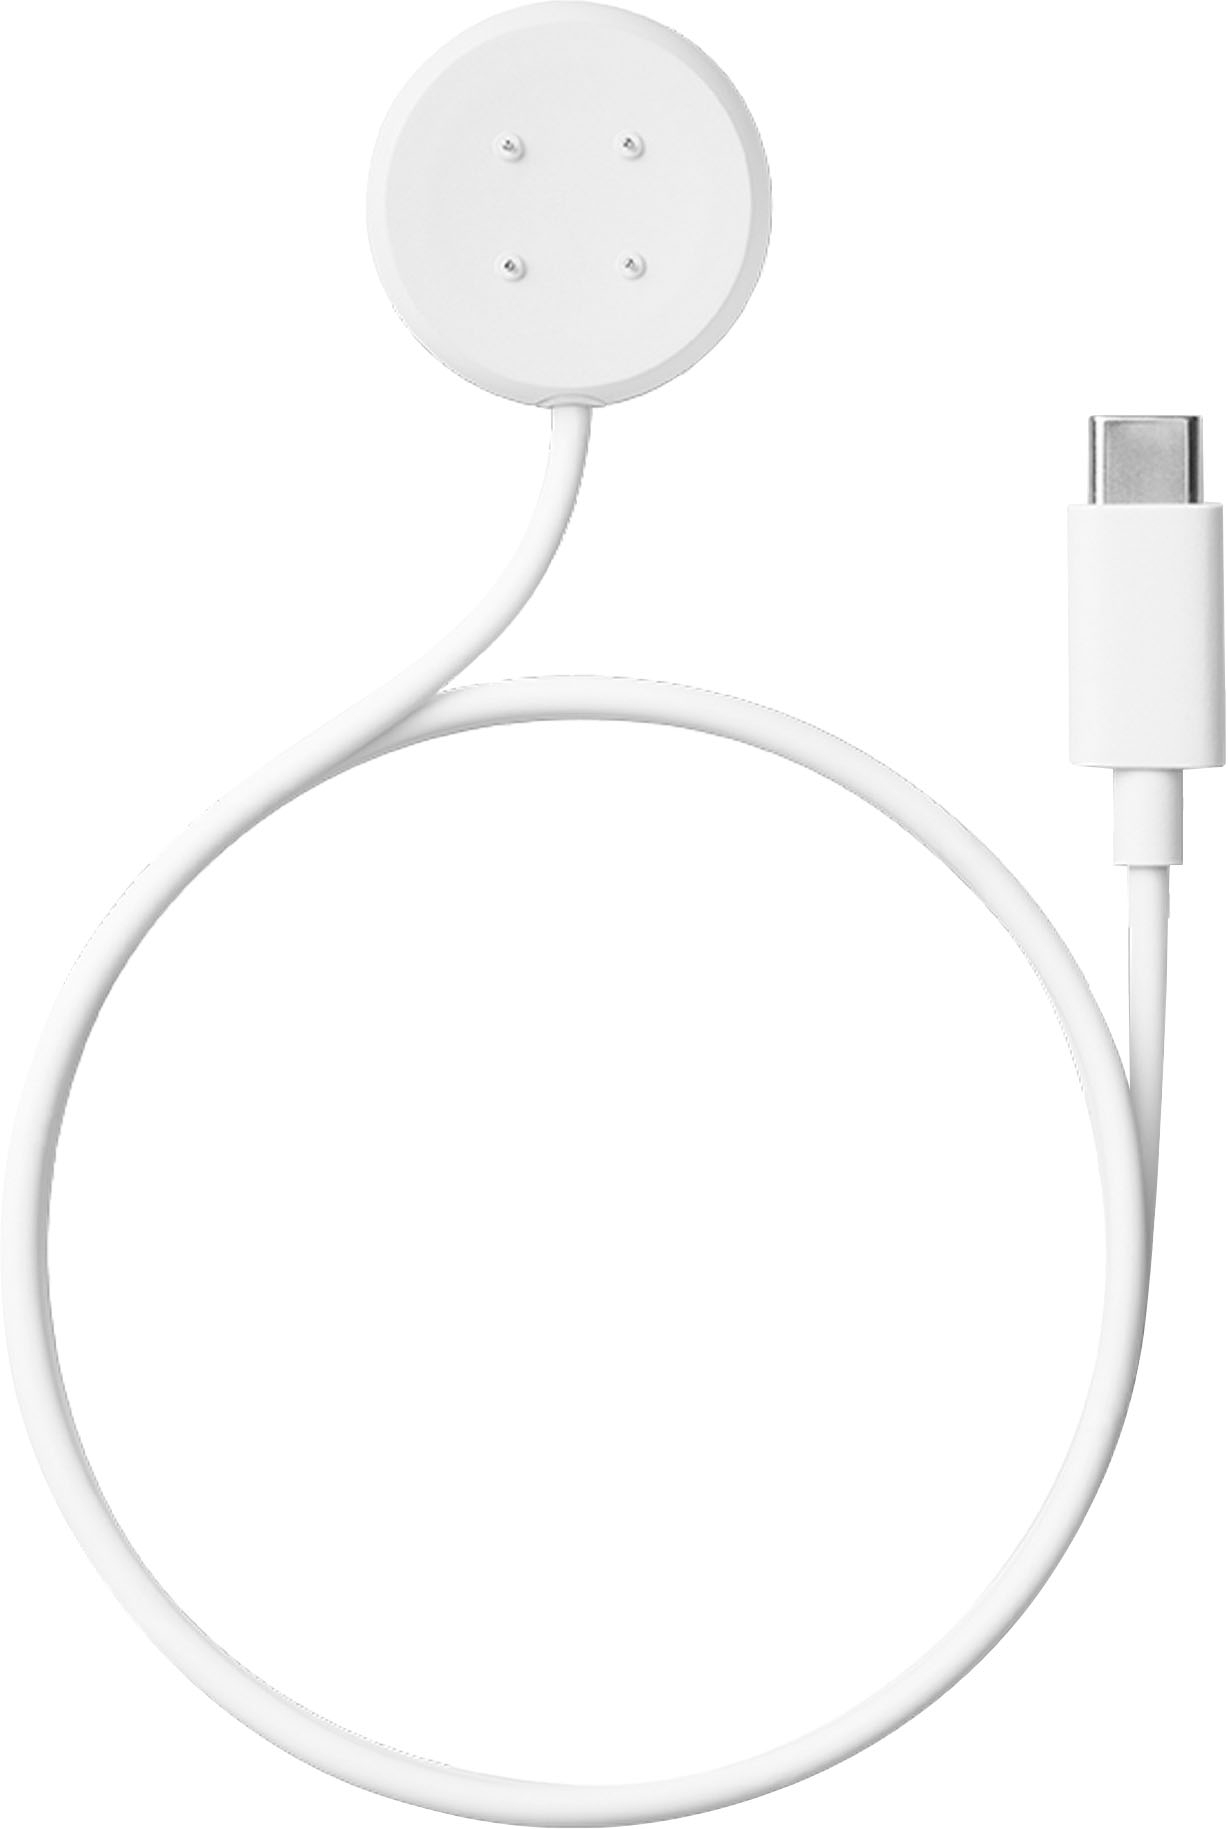 Angle View: Google - Pixel Watch 2 USB-C Fast Charging Cable - White